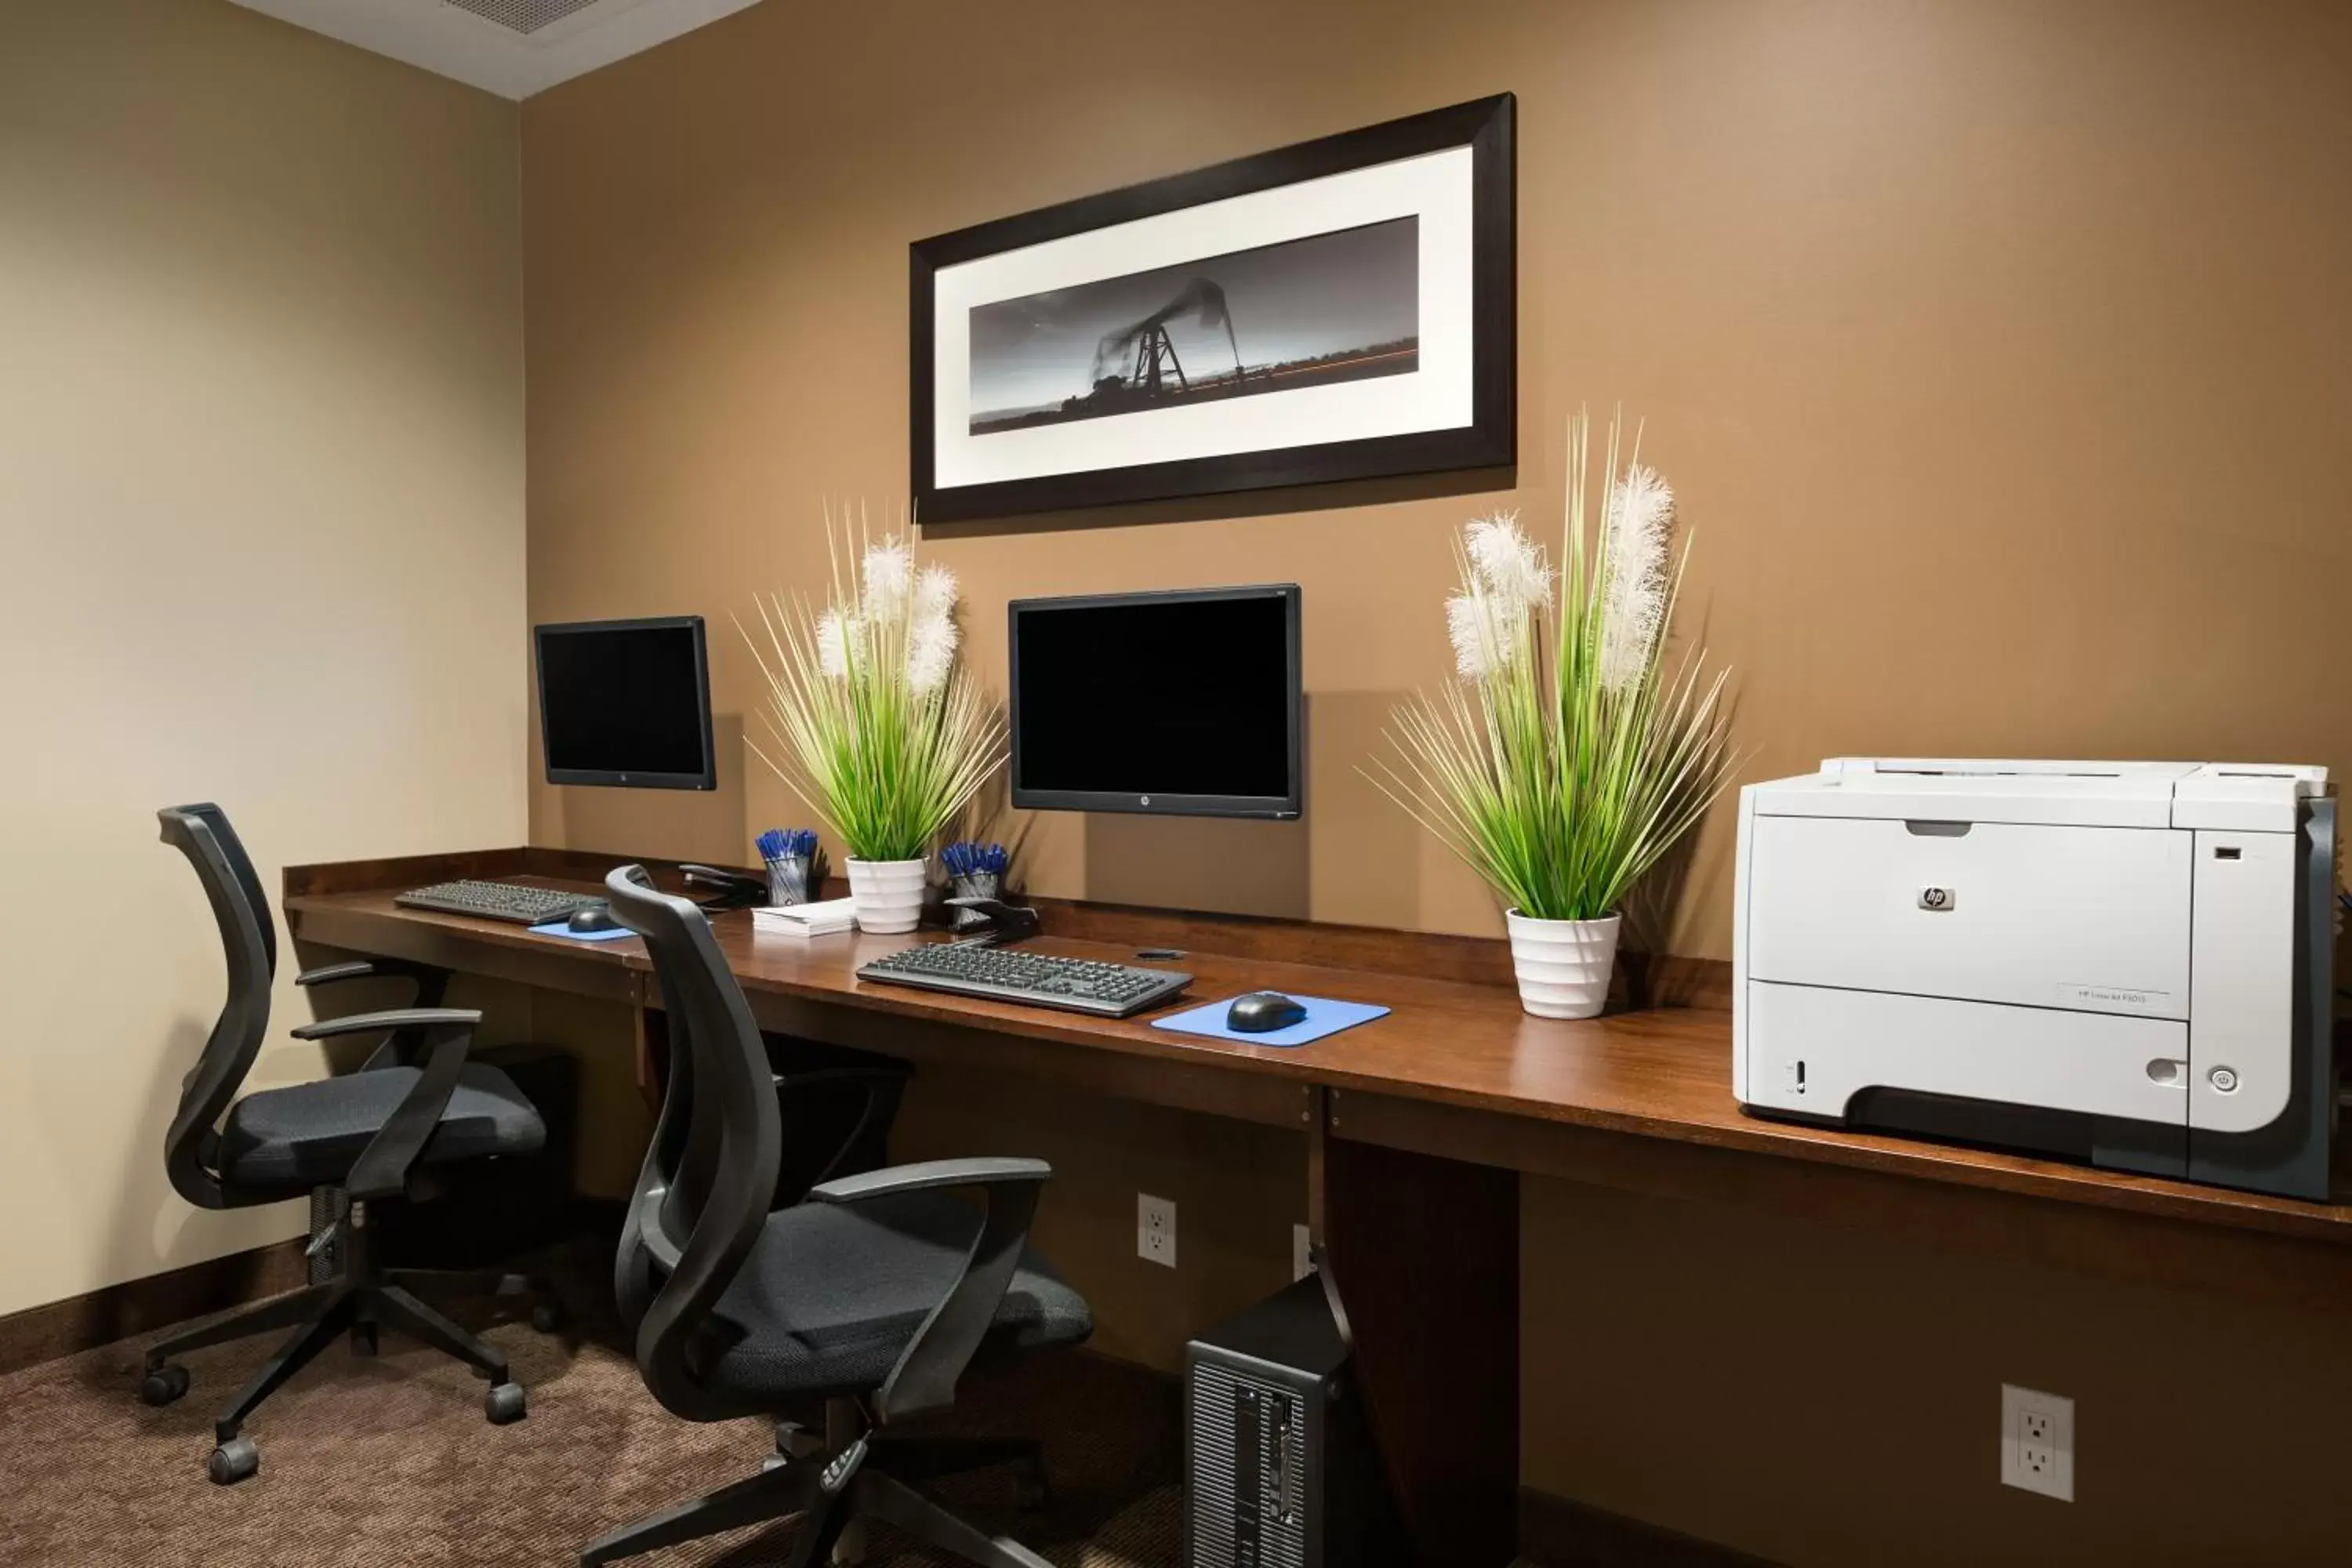 Business facilities in Microtel Inn & Suites by Wyndham Lloydminster